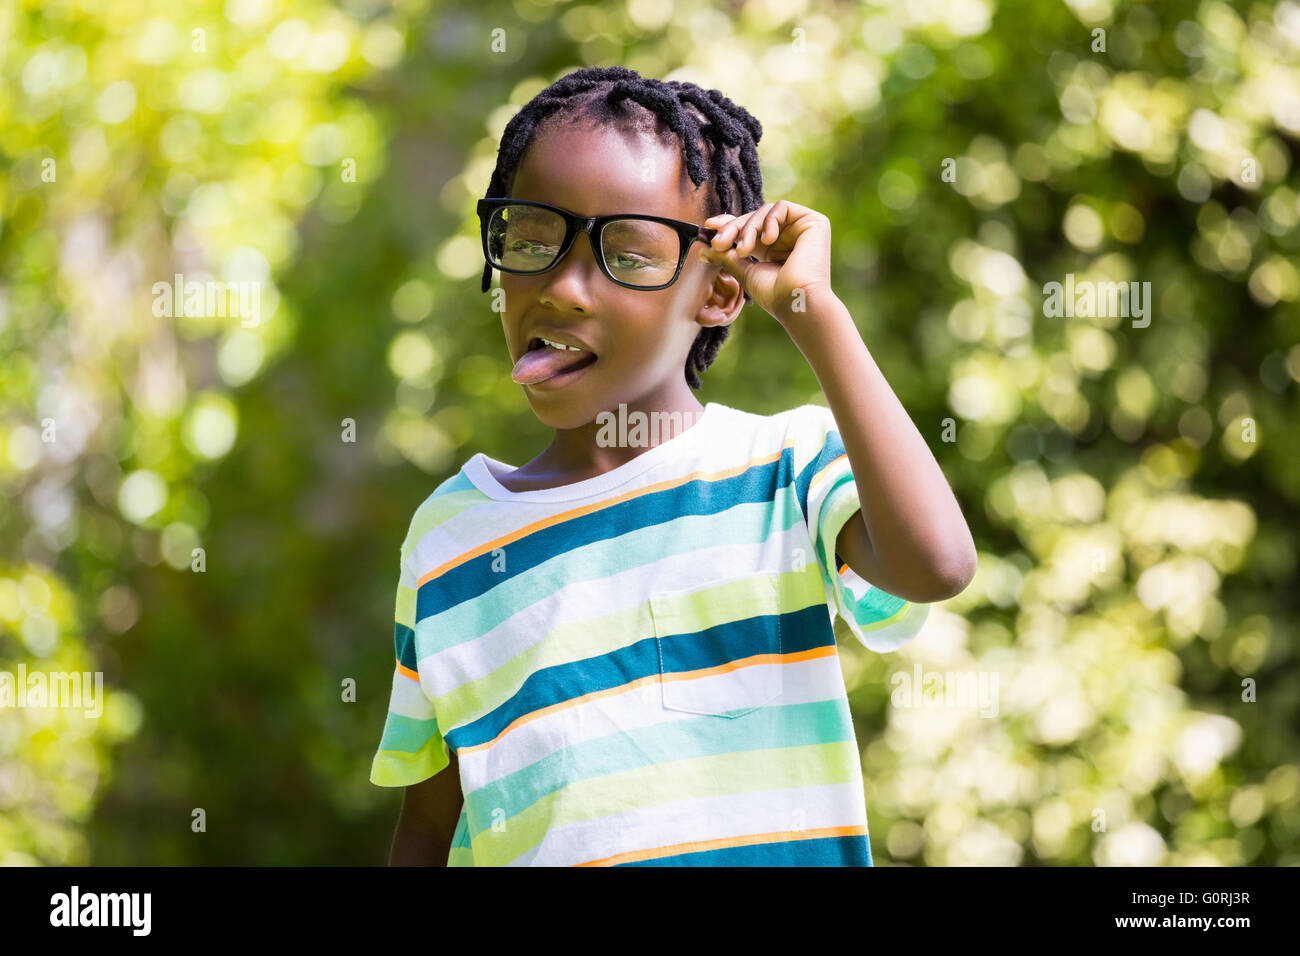 A kid sticking his tongue out Stock Photo